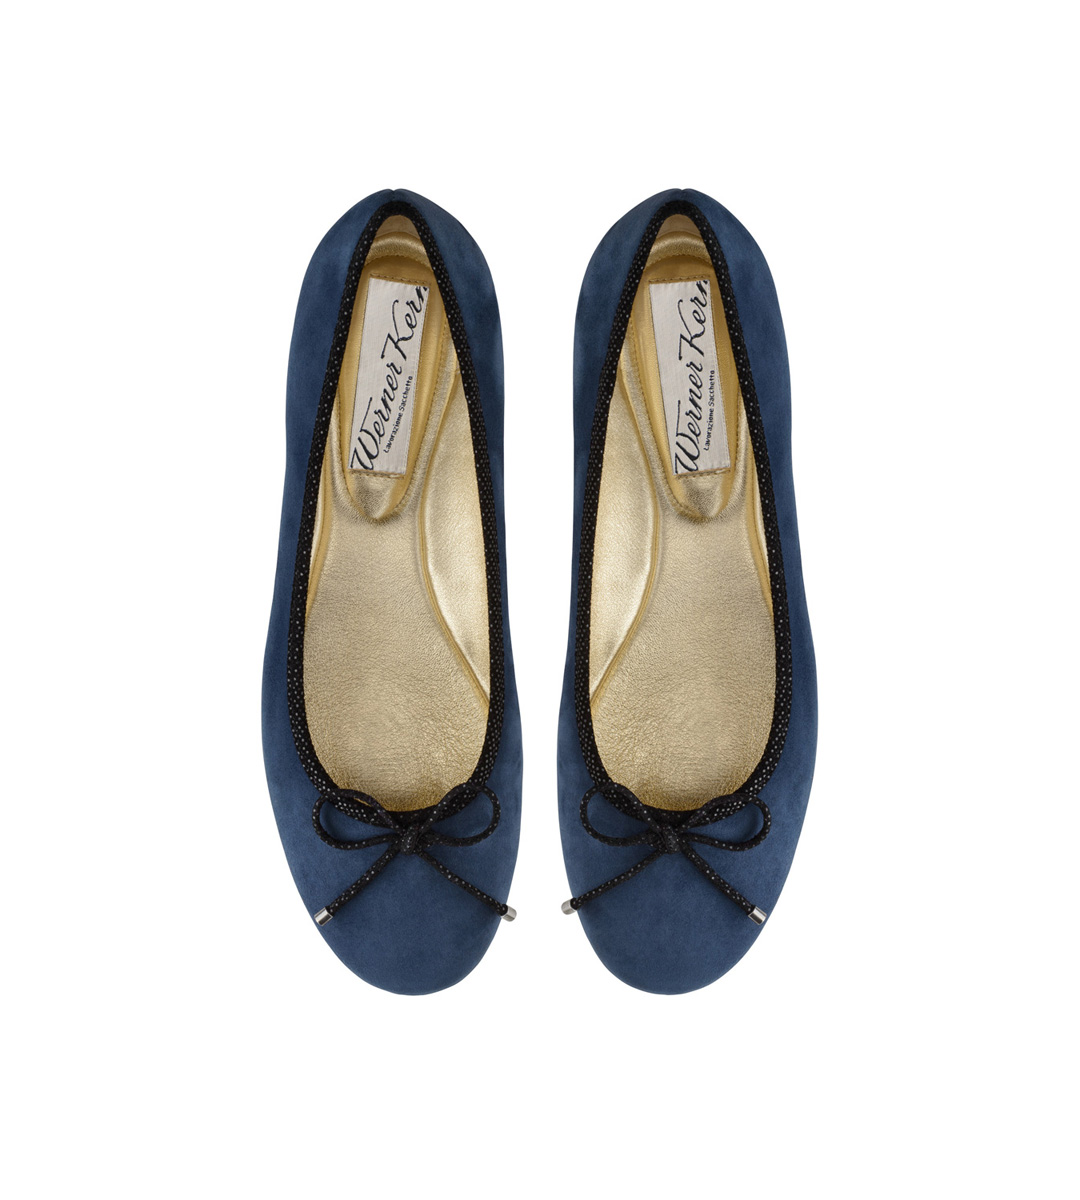 Navy blue ballerina Dana in soft suede and black bow